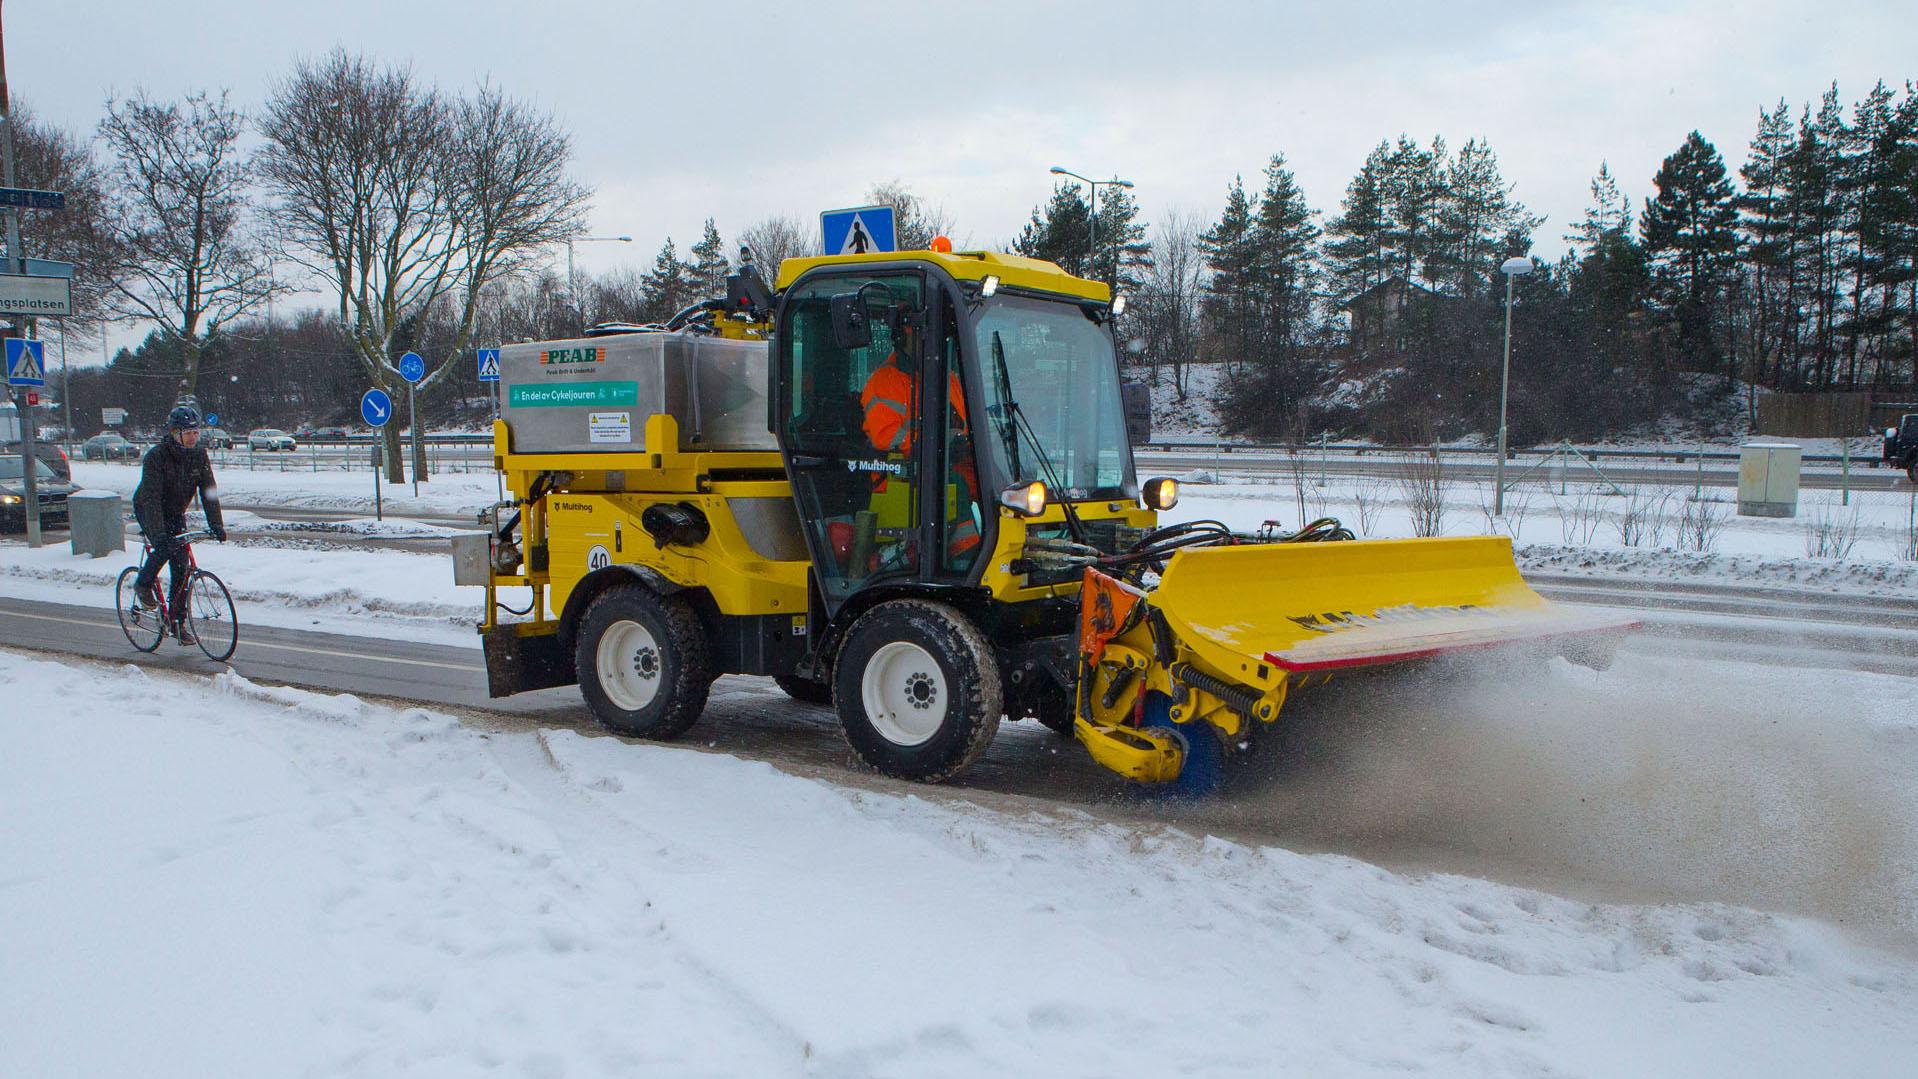 Stockholm has nine new Irish-made "Multihog" machines clearing the area's bike paths in winter.